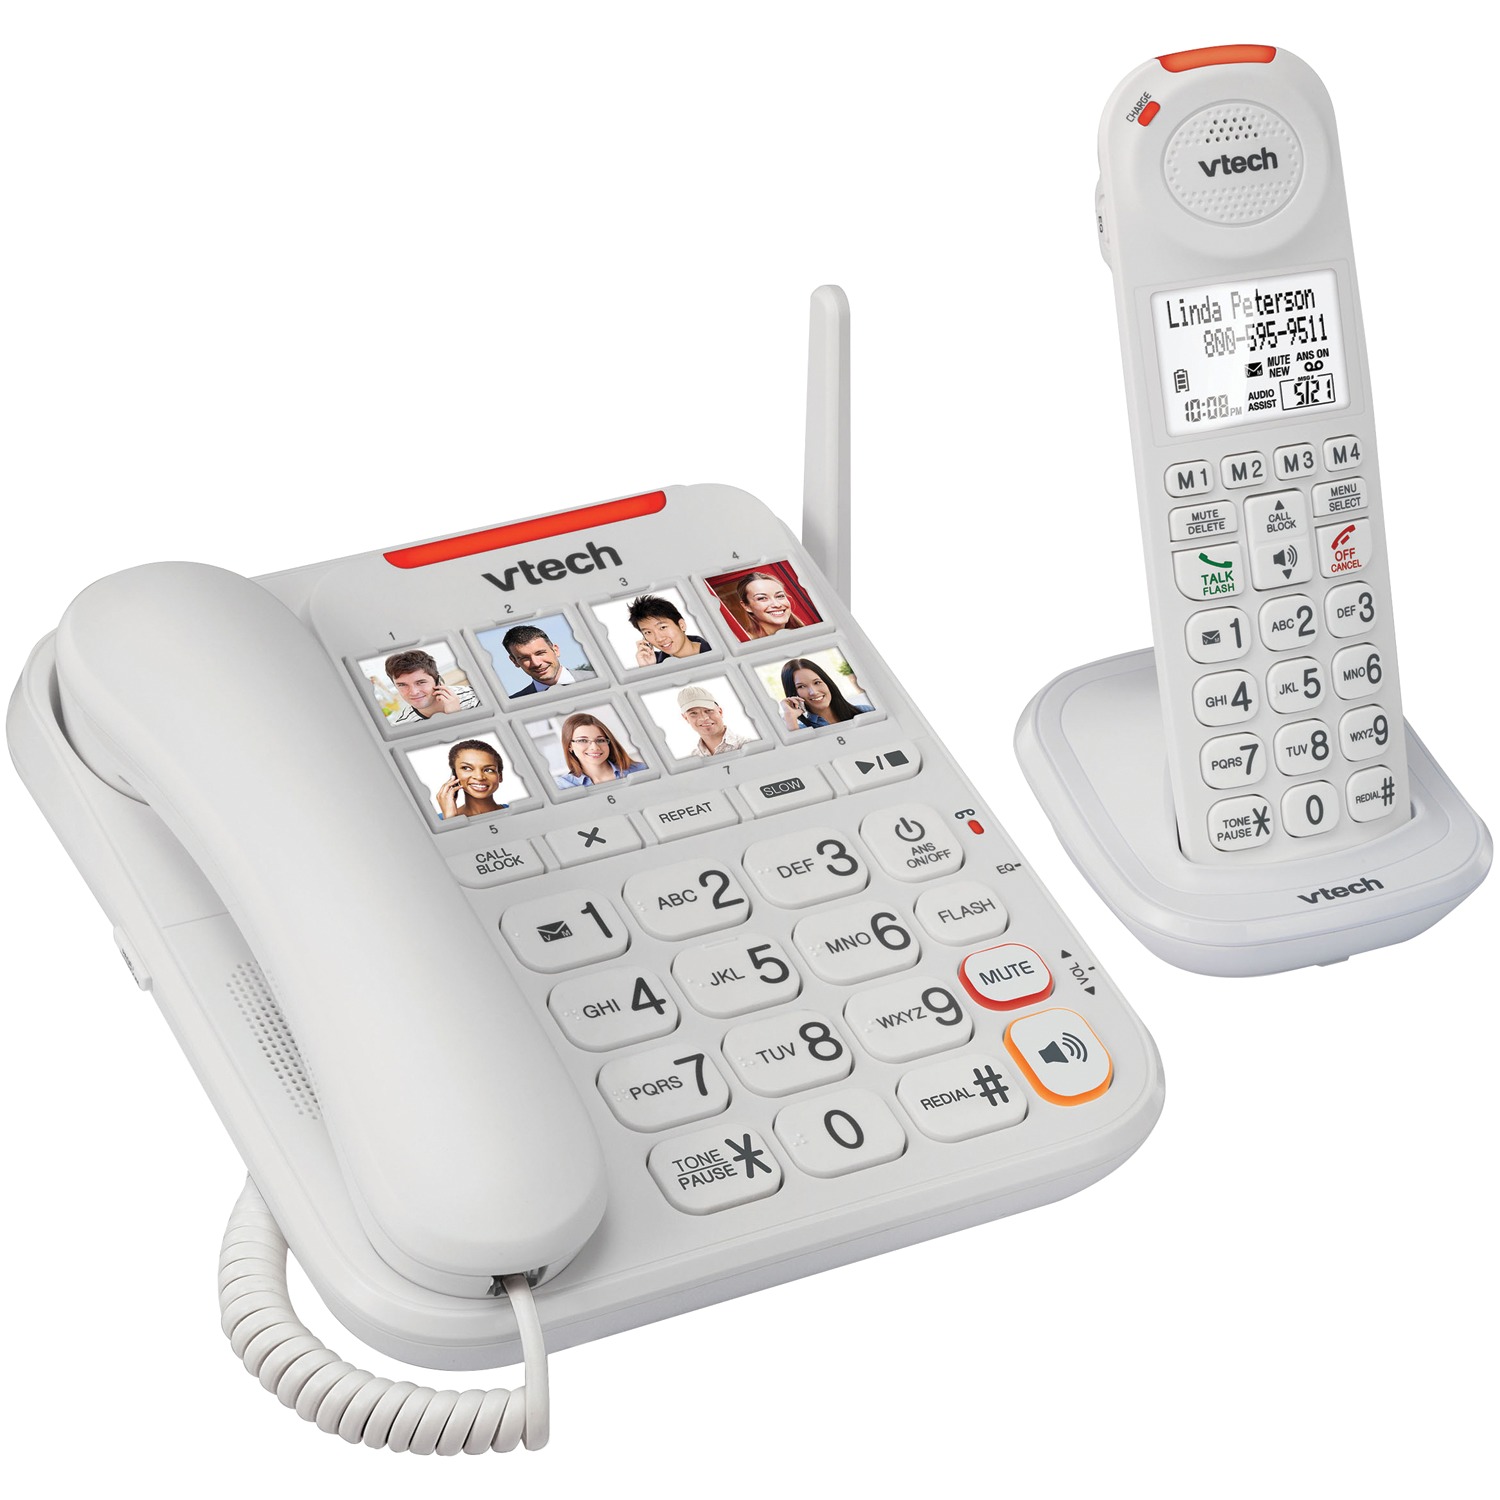 VTech Amplified Corded/Cordless Answering System with Big Buttons & Display, VTSN5147 - image 2 of 3